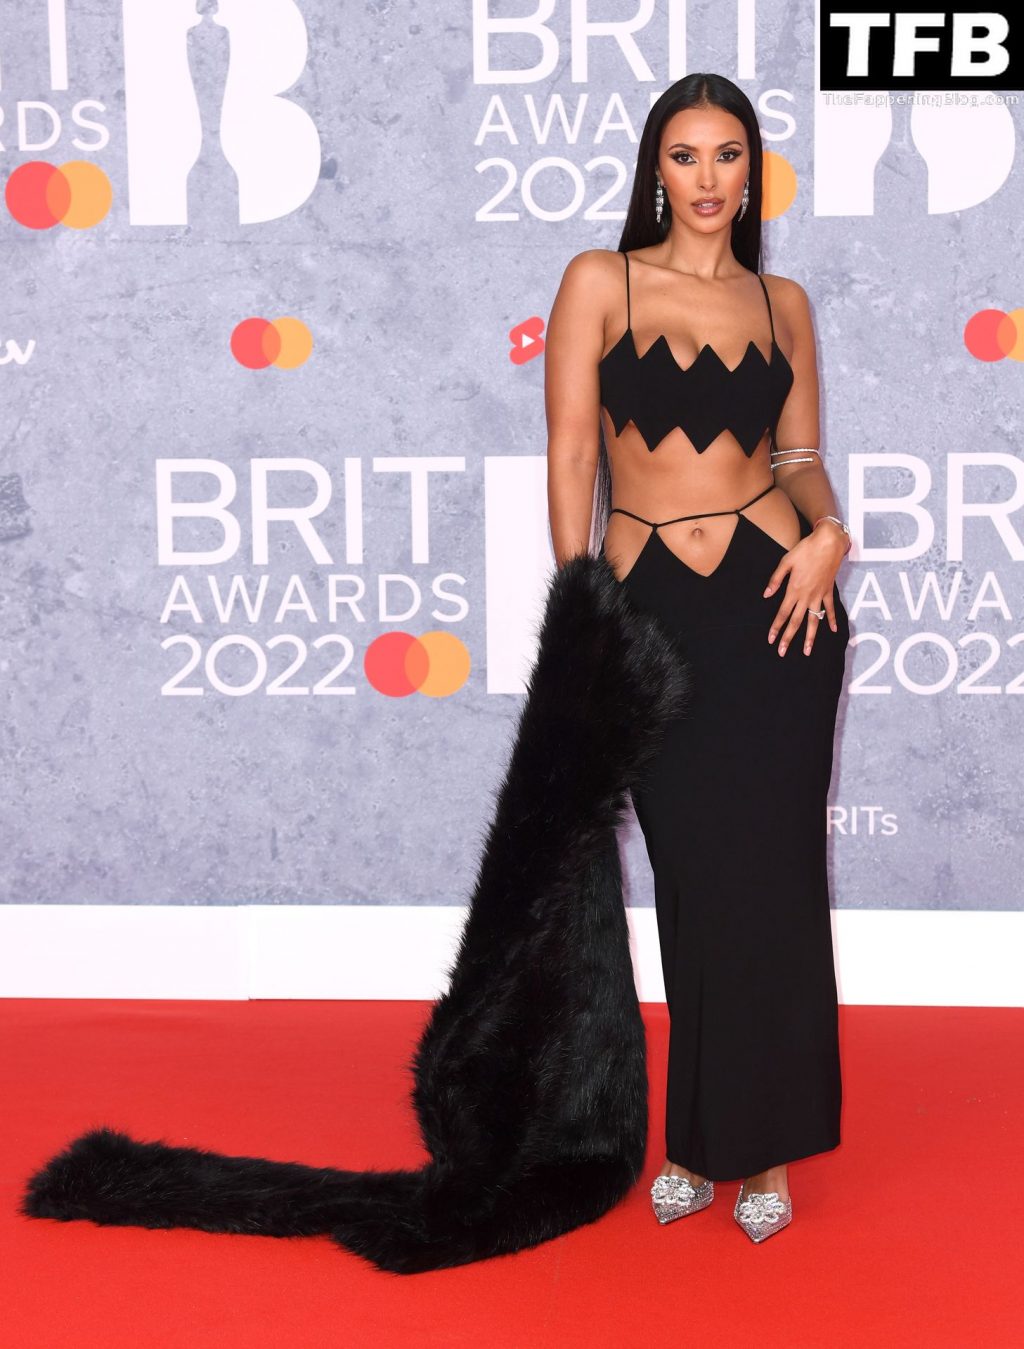 Maya Jama Flashes Her Boobs and Abs in a Very Skimpy Dress at The BRIT Awards (99 Photos)